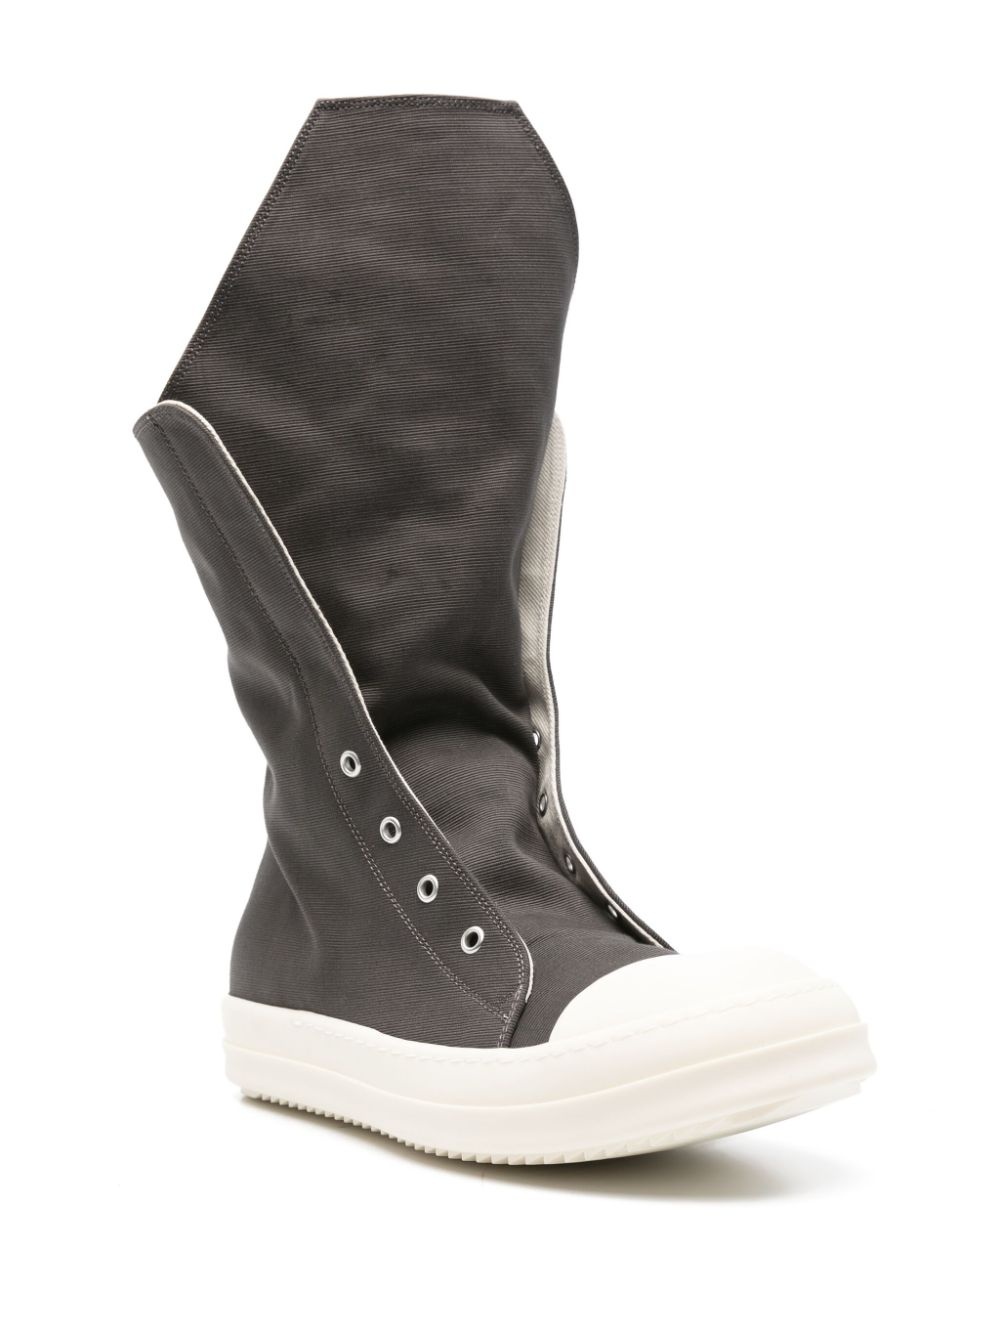 oversize-tongue sneaker boots - 2